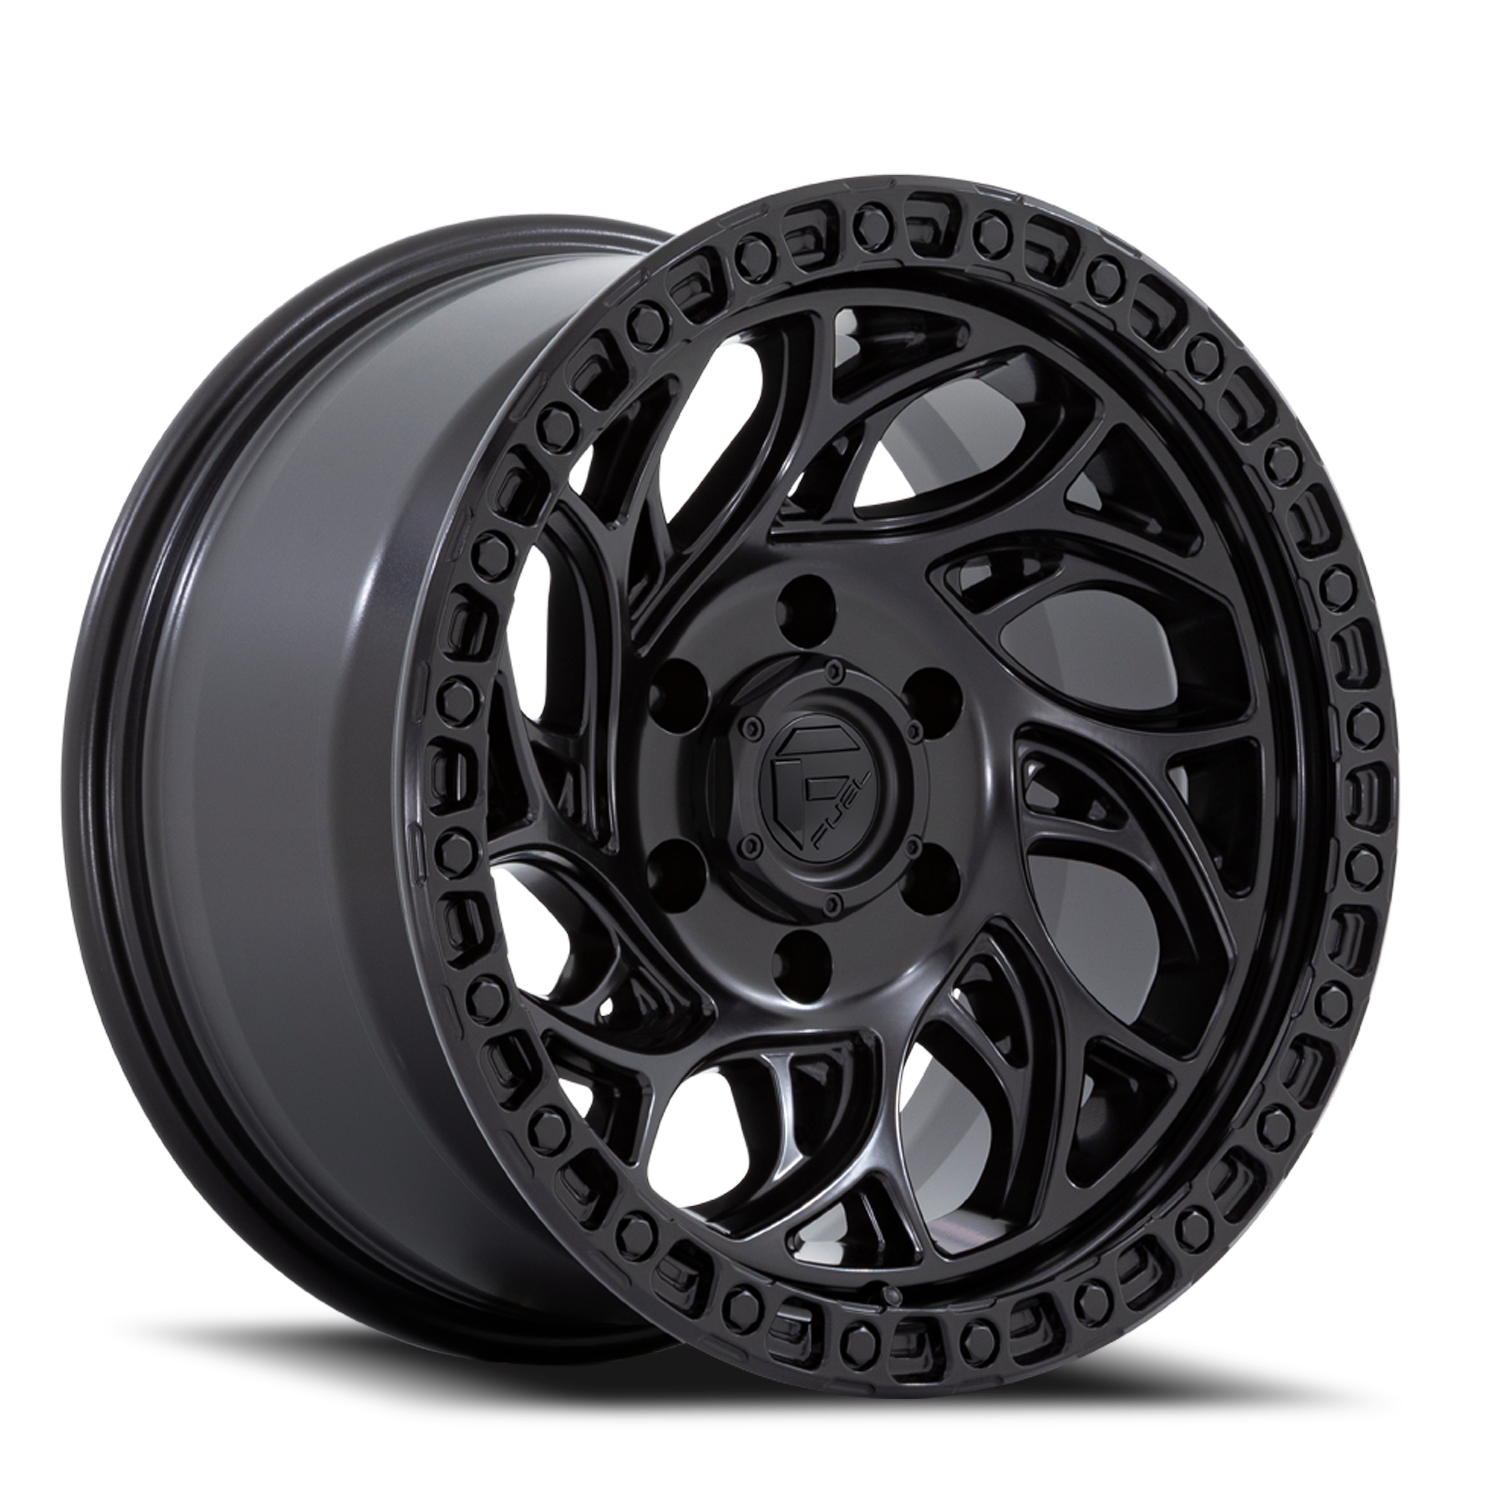 Aluminum Wheels 18X9 Runner OR D852 5 On 150 Blackout 110.1 Bore -12 Offset Fuel Off Road Wheels